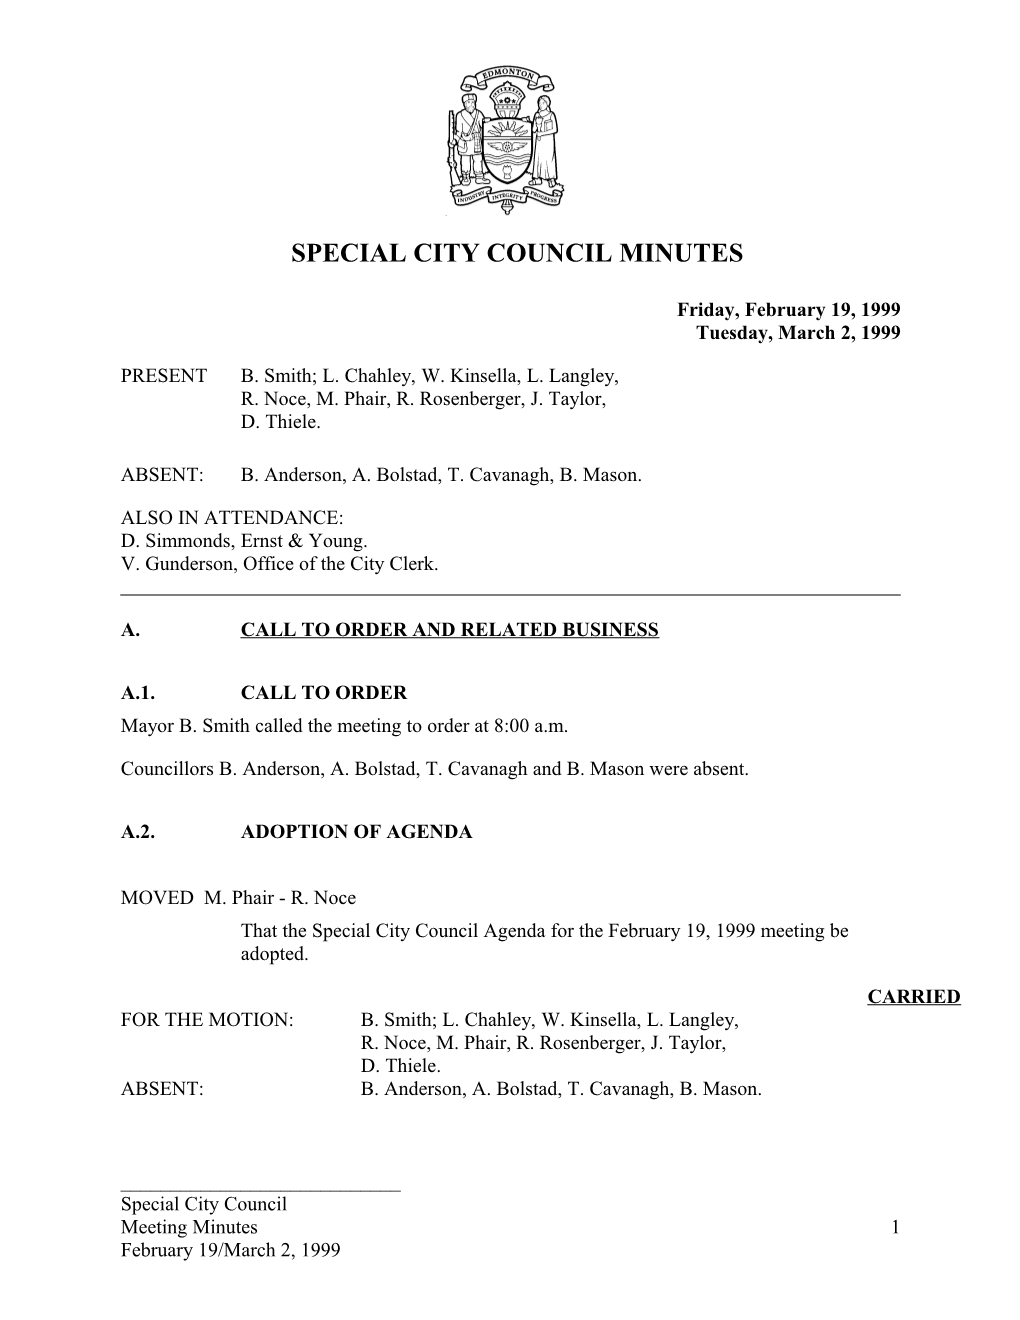 Minutes for City Council February 19, 1999 Meeting